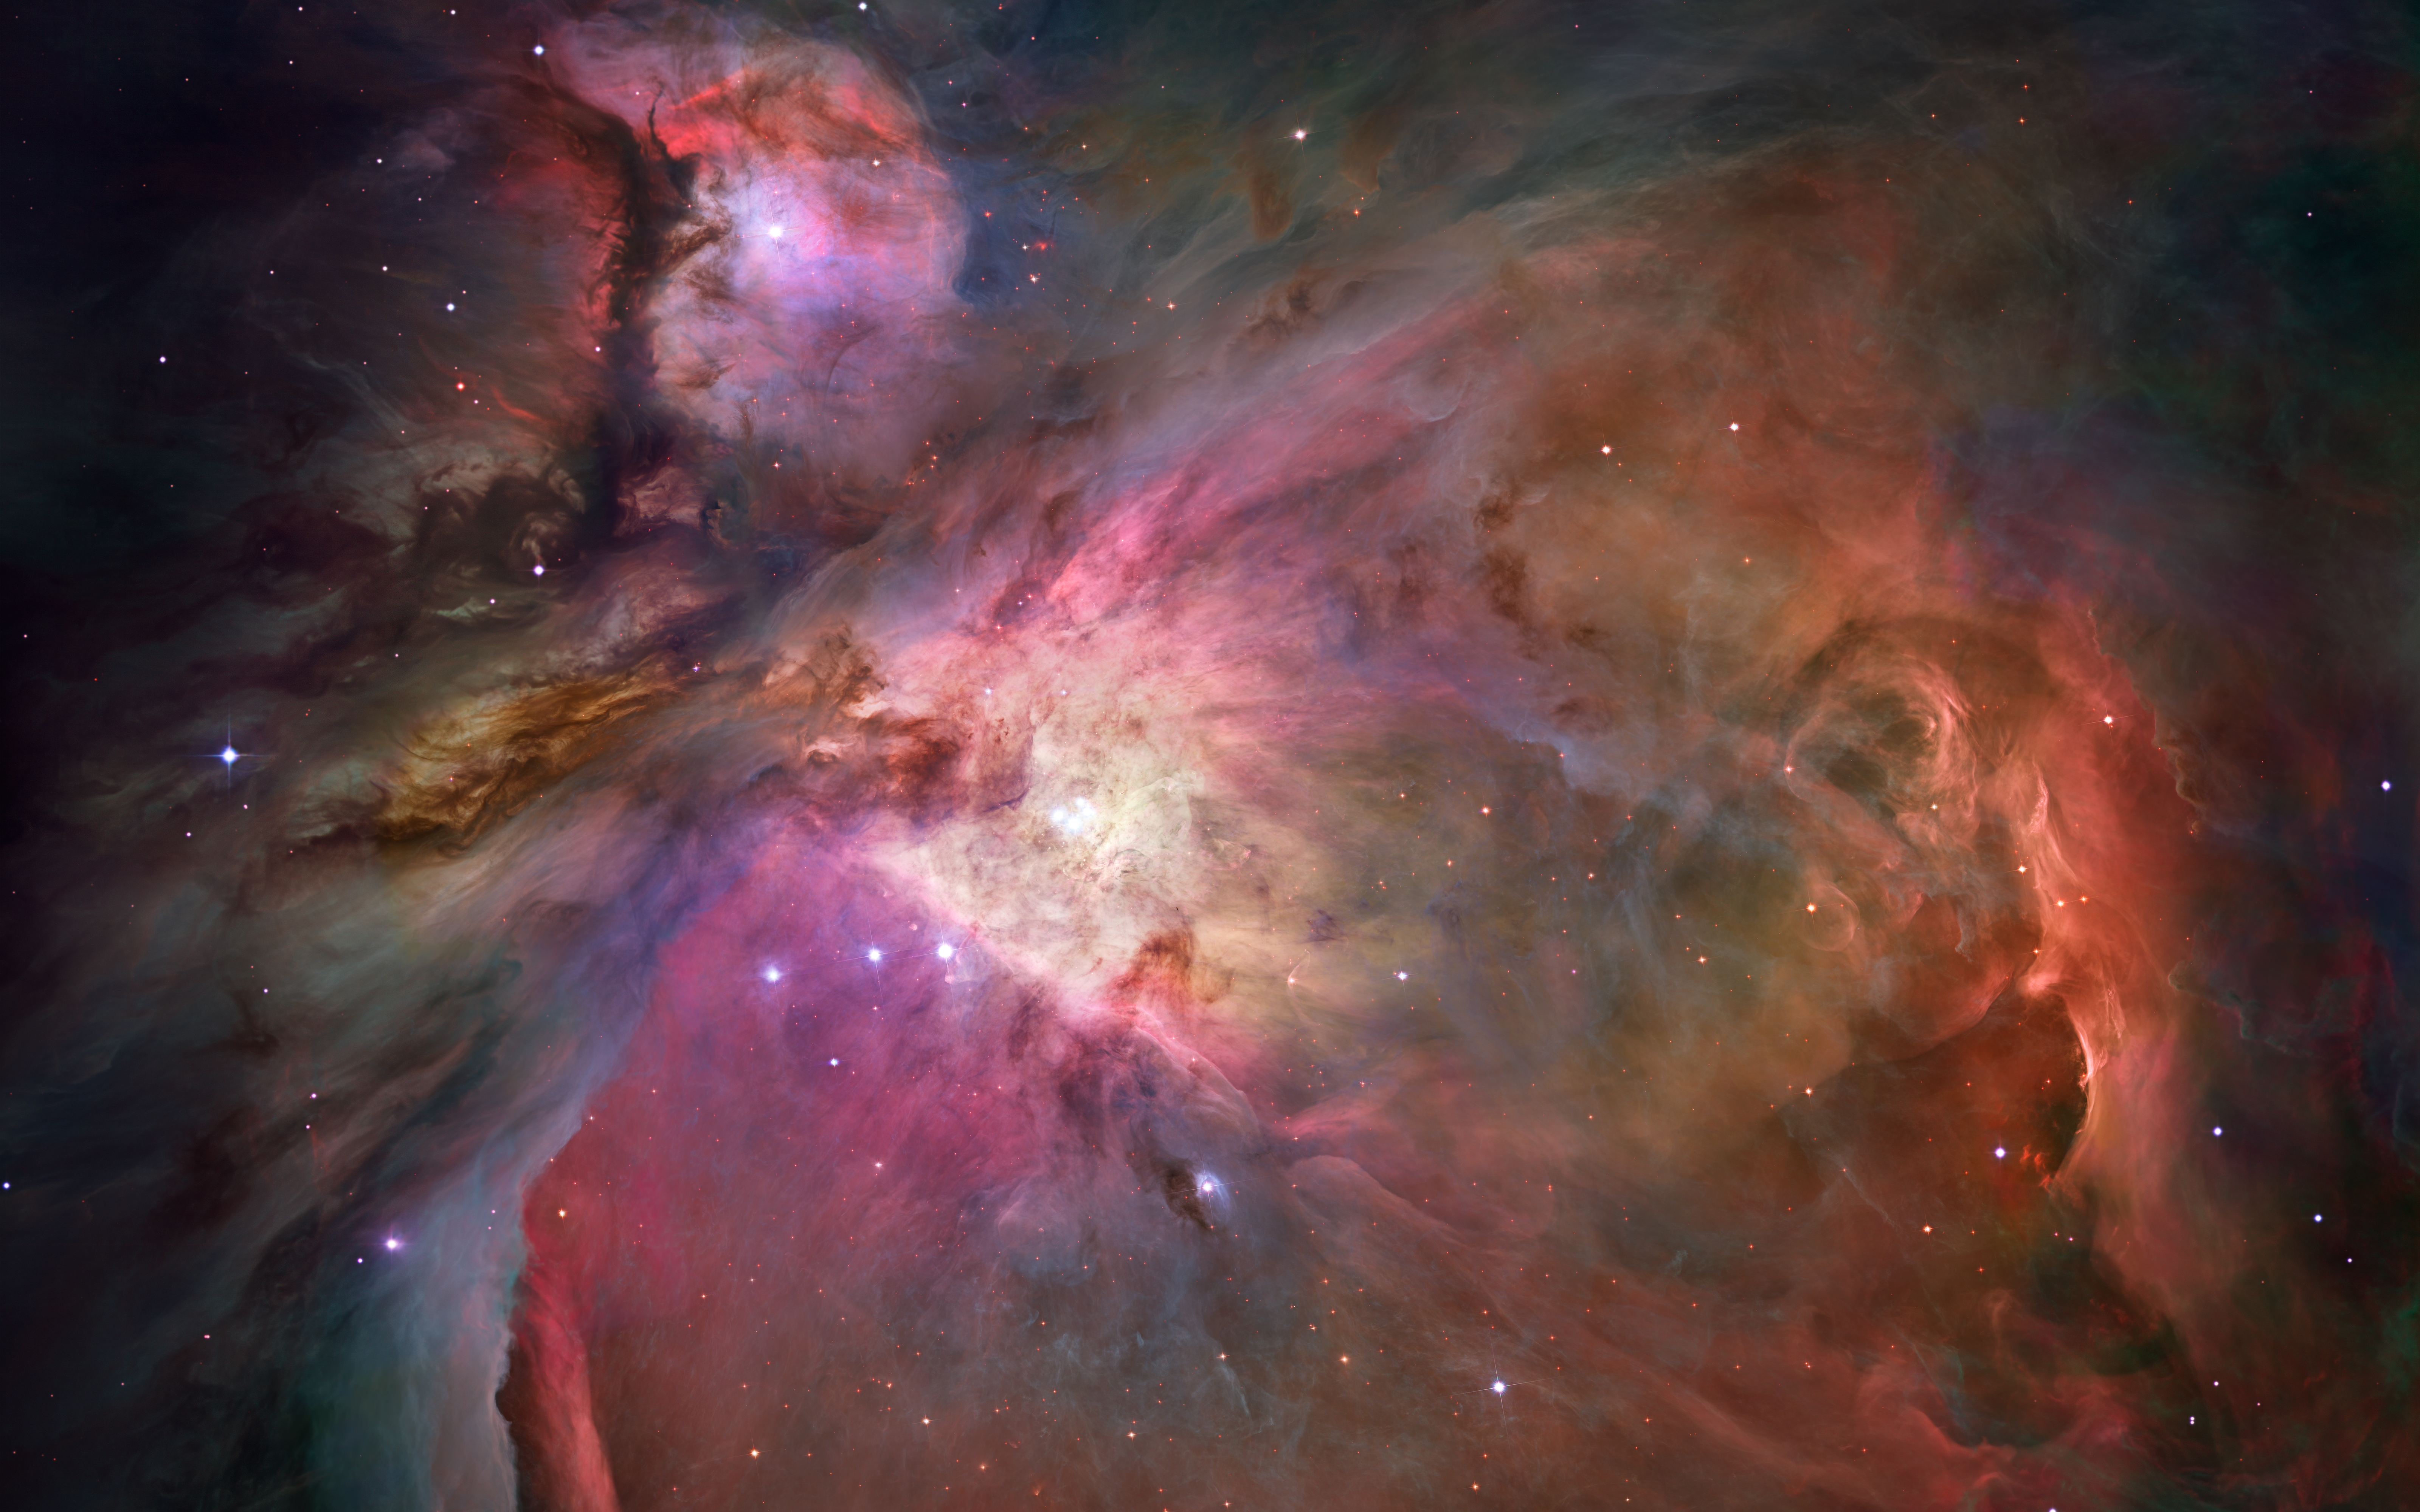 HD wallpaper, Stars, Orion Nebula, 5K, Astronomy, Interstellar Cloud, Cosmos, Outer Space